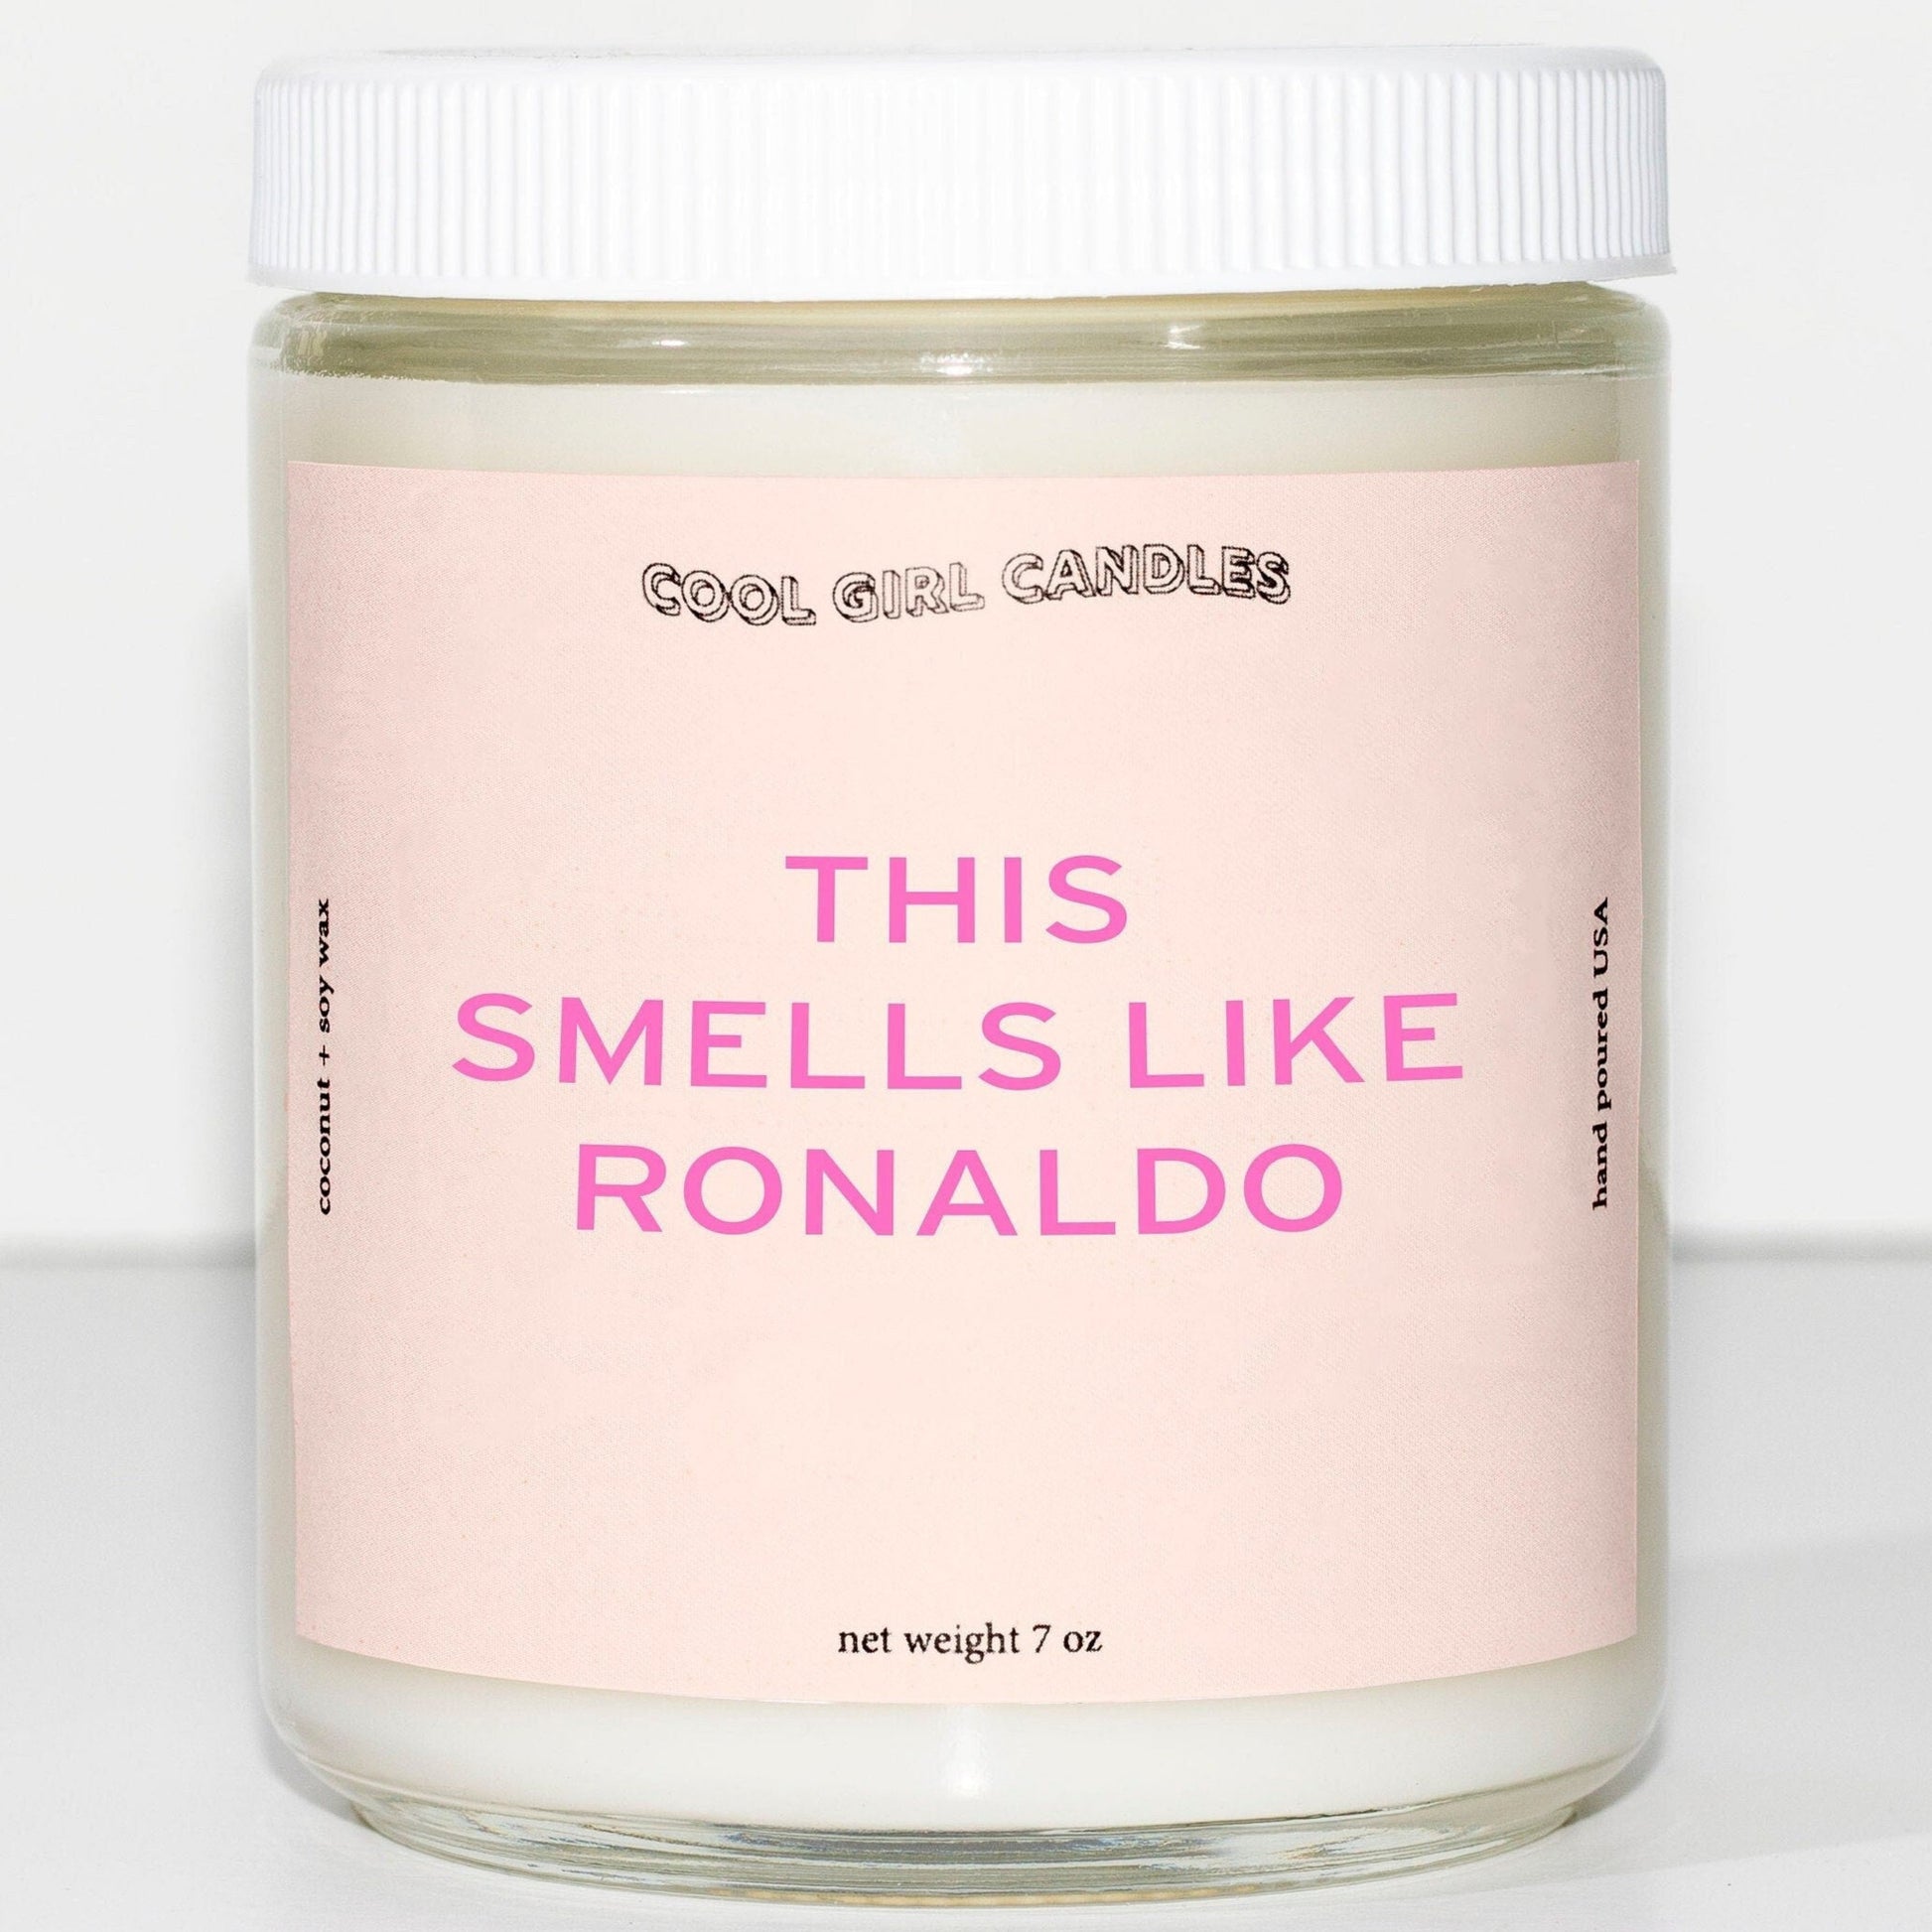 this smells like ronaldo scented candle